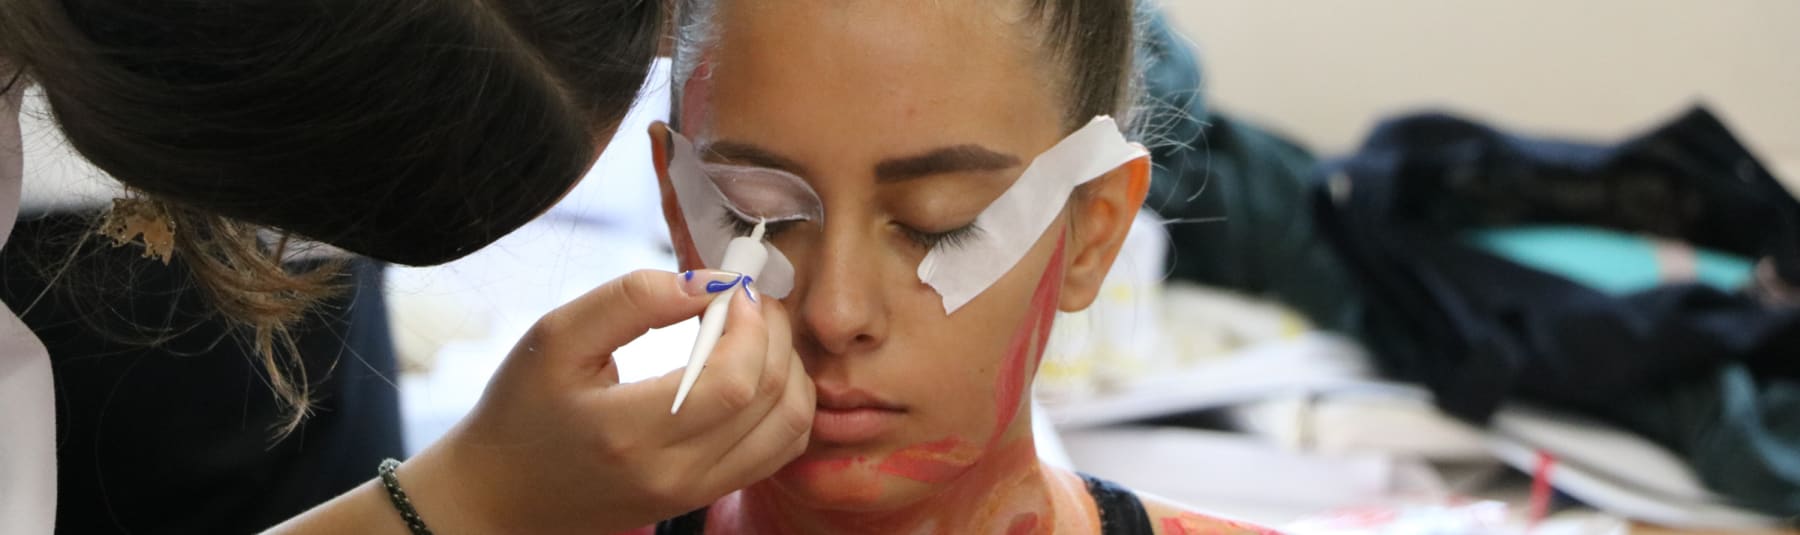 Special Effects Makeup for Film and TV for 11 to 15 Year Olds Short Course  | UAL